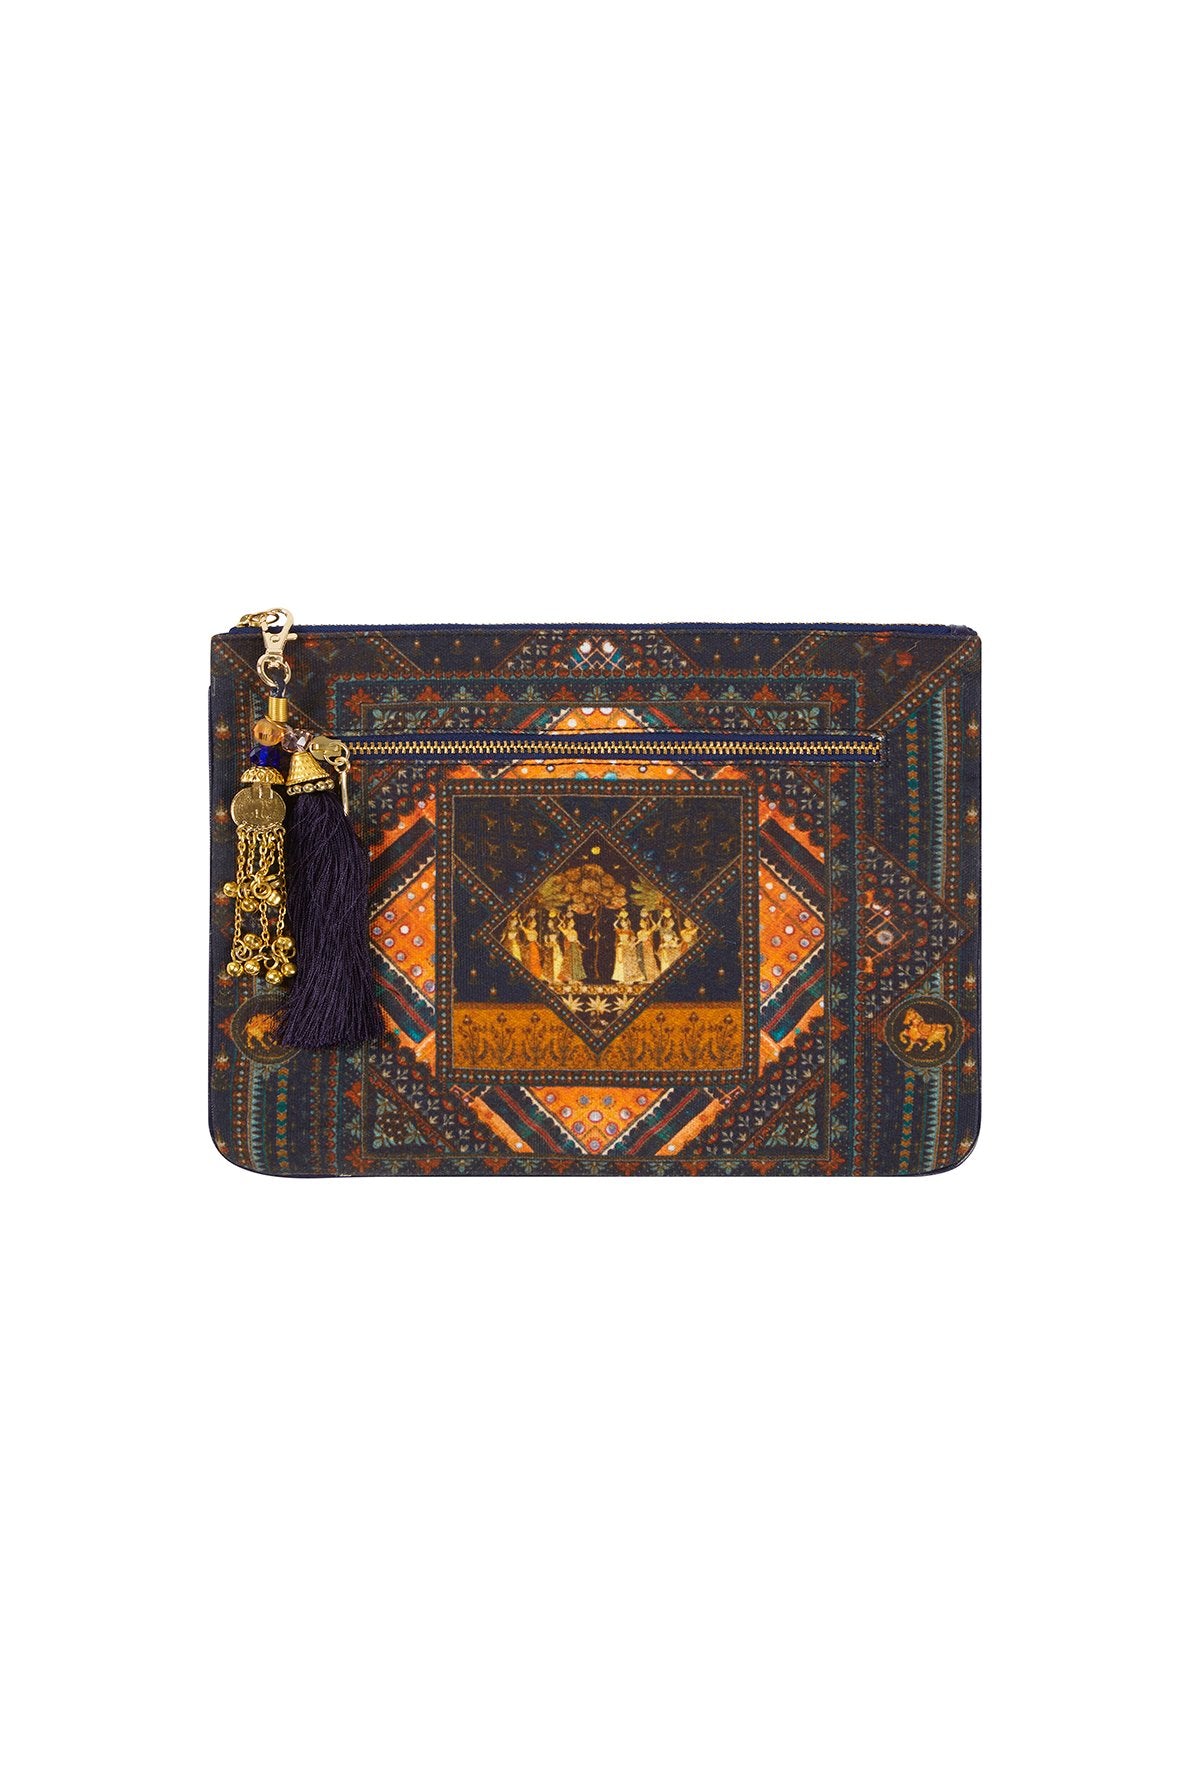 BLISS OF BOHEMIA SMALL CANVAS CLUTCH